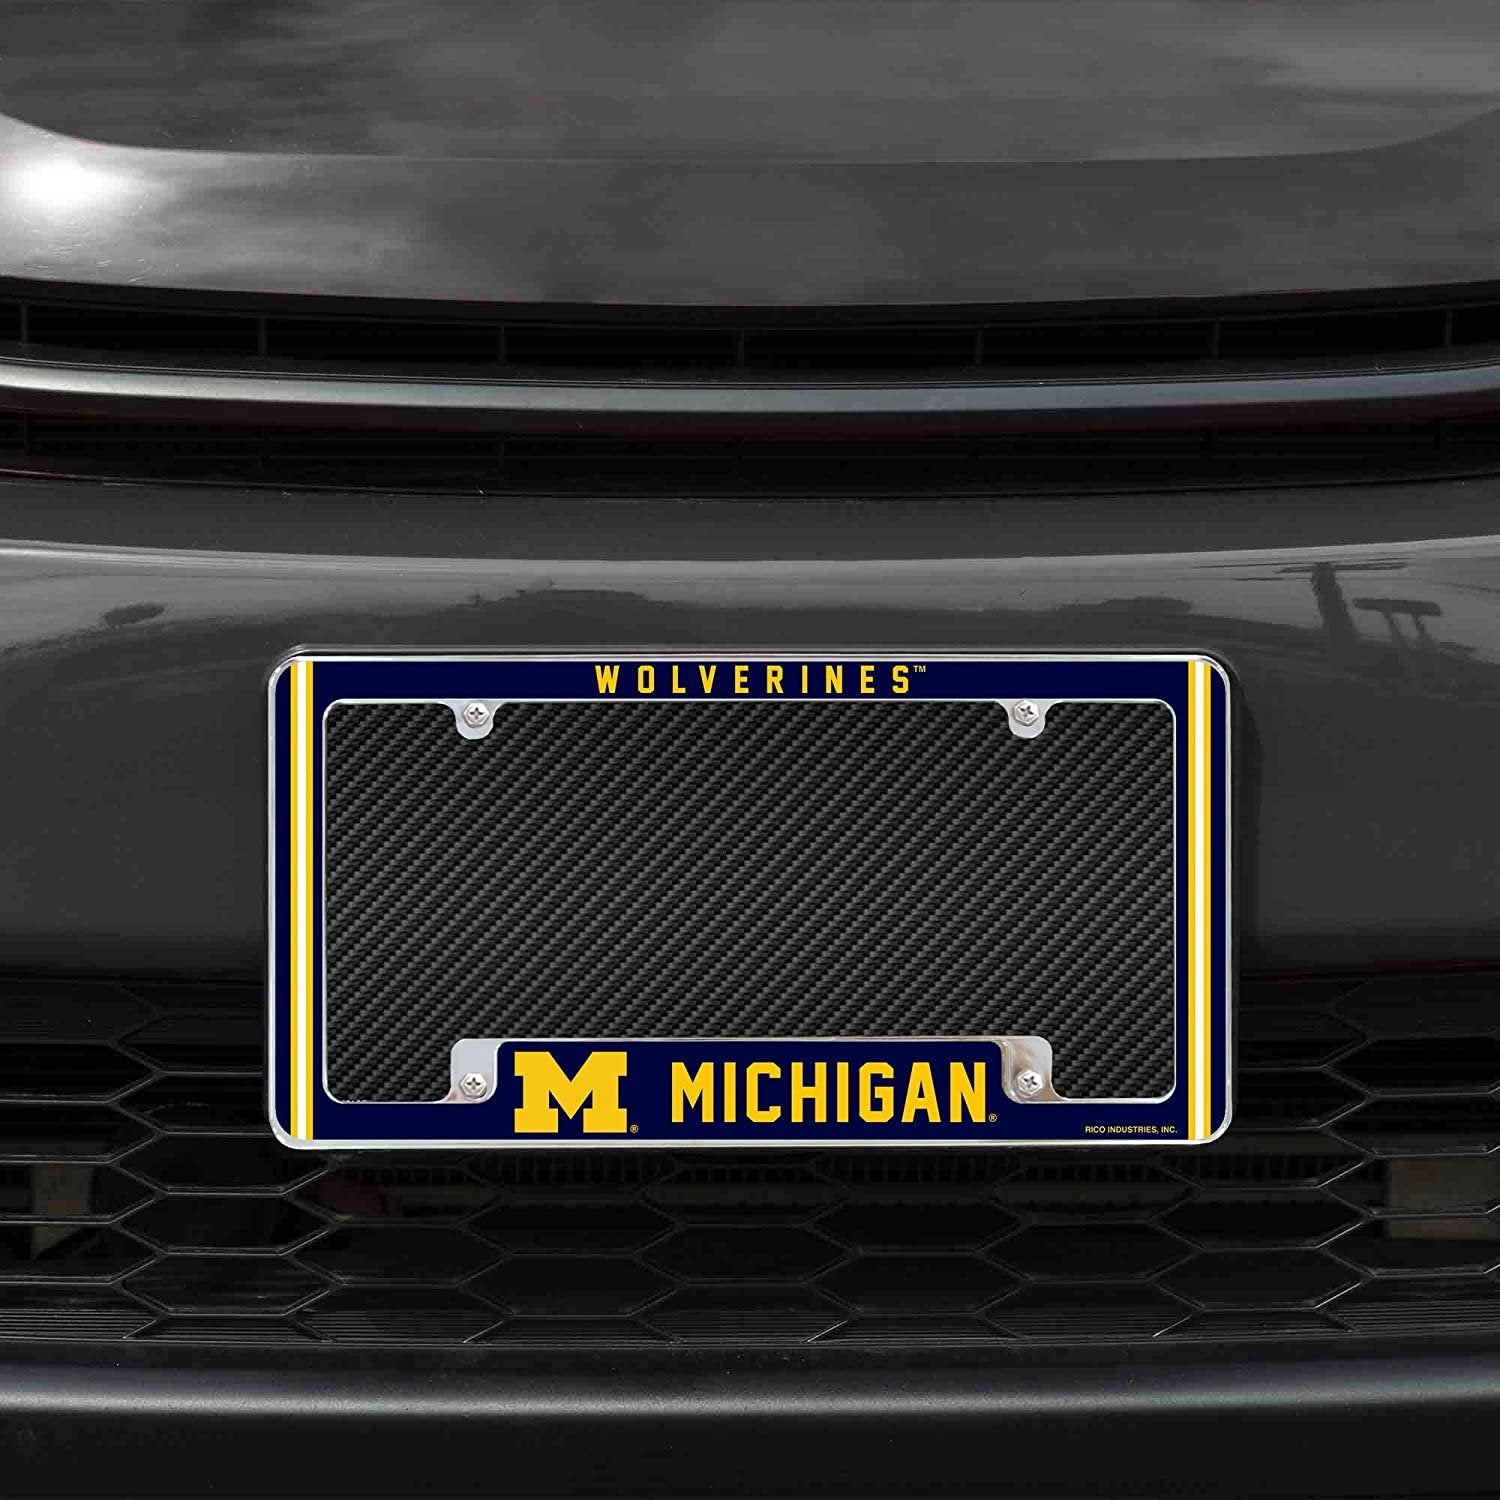 University of Michigan Wolverines Metal License Plate Frame Chrome Tag Cover Alternate Design 6x12 Inch